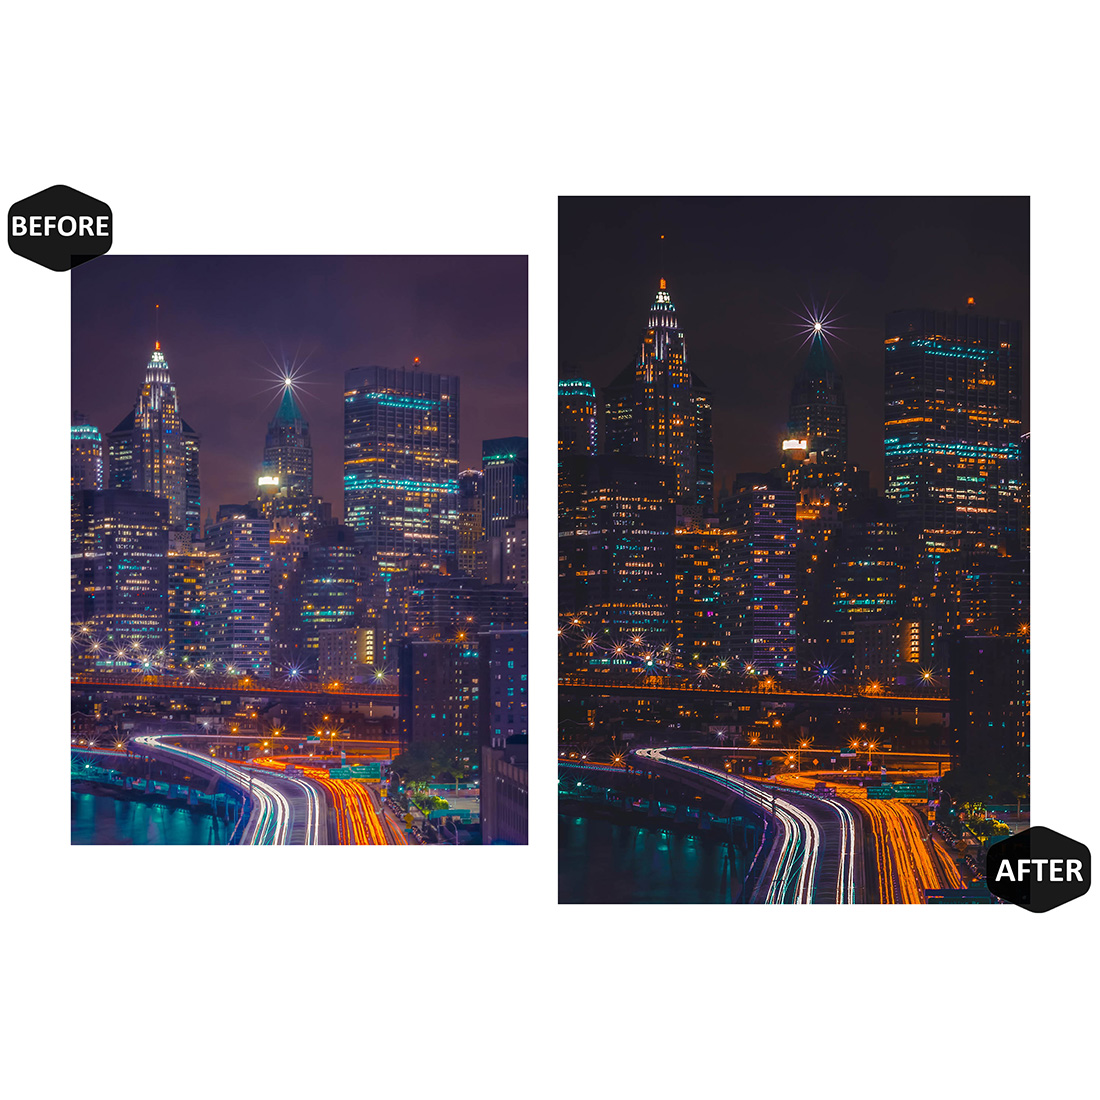 12 Photoshop Actions, City At Night Ps Action, Moody Urban ACR Preset, Orange Street Ps Filter, Atn Portrait And Lifestyle Theme For Instagram, Blogger preview image.